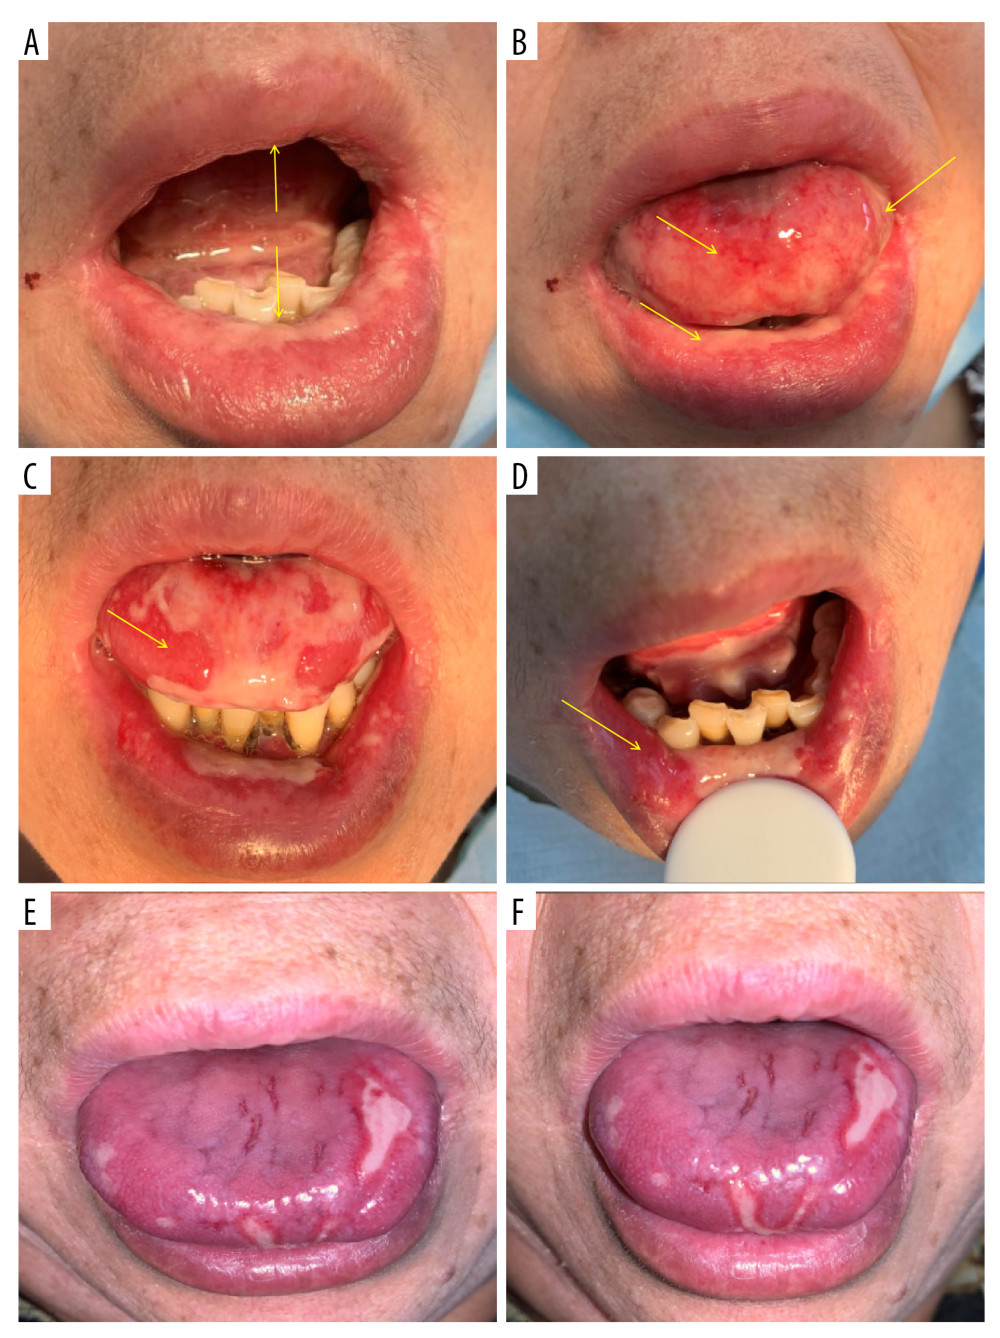 Images of the patient at the initial visit and after treatment. Day 1. (A) Initial visit, moderate limitation in mouth opening, restricted tongue movement; (B) Extensive erosion of the tongue and oral mucosa; Day 2. (C) The next day, mild limitation in mouth opening, improved tongue movement compared to before, partial healing of the dorsal tongue and mucosa; (D) Increased yellow pseudomembrane on the mucosal surface; Day 3. (E) Third day of medication, no limitation in mouth opening, free tongue movement, small portion of mucosa not healed; (F) Slight reddening at the edges of the pseudomembrane.